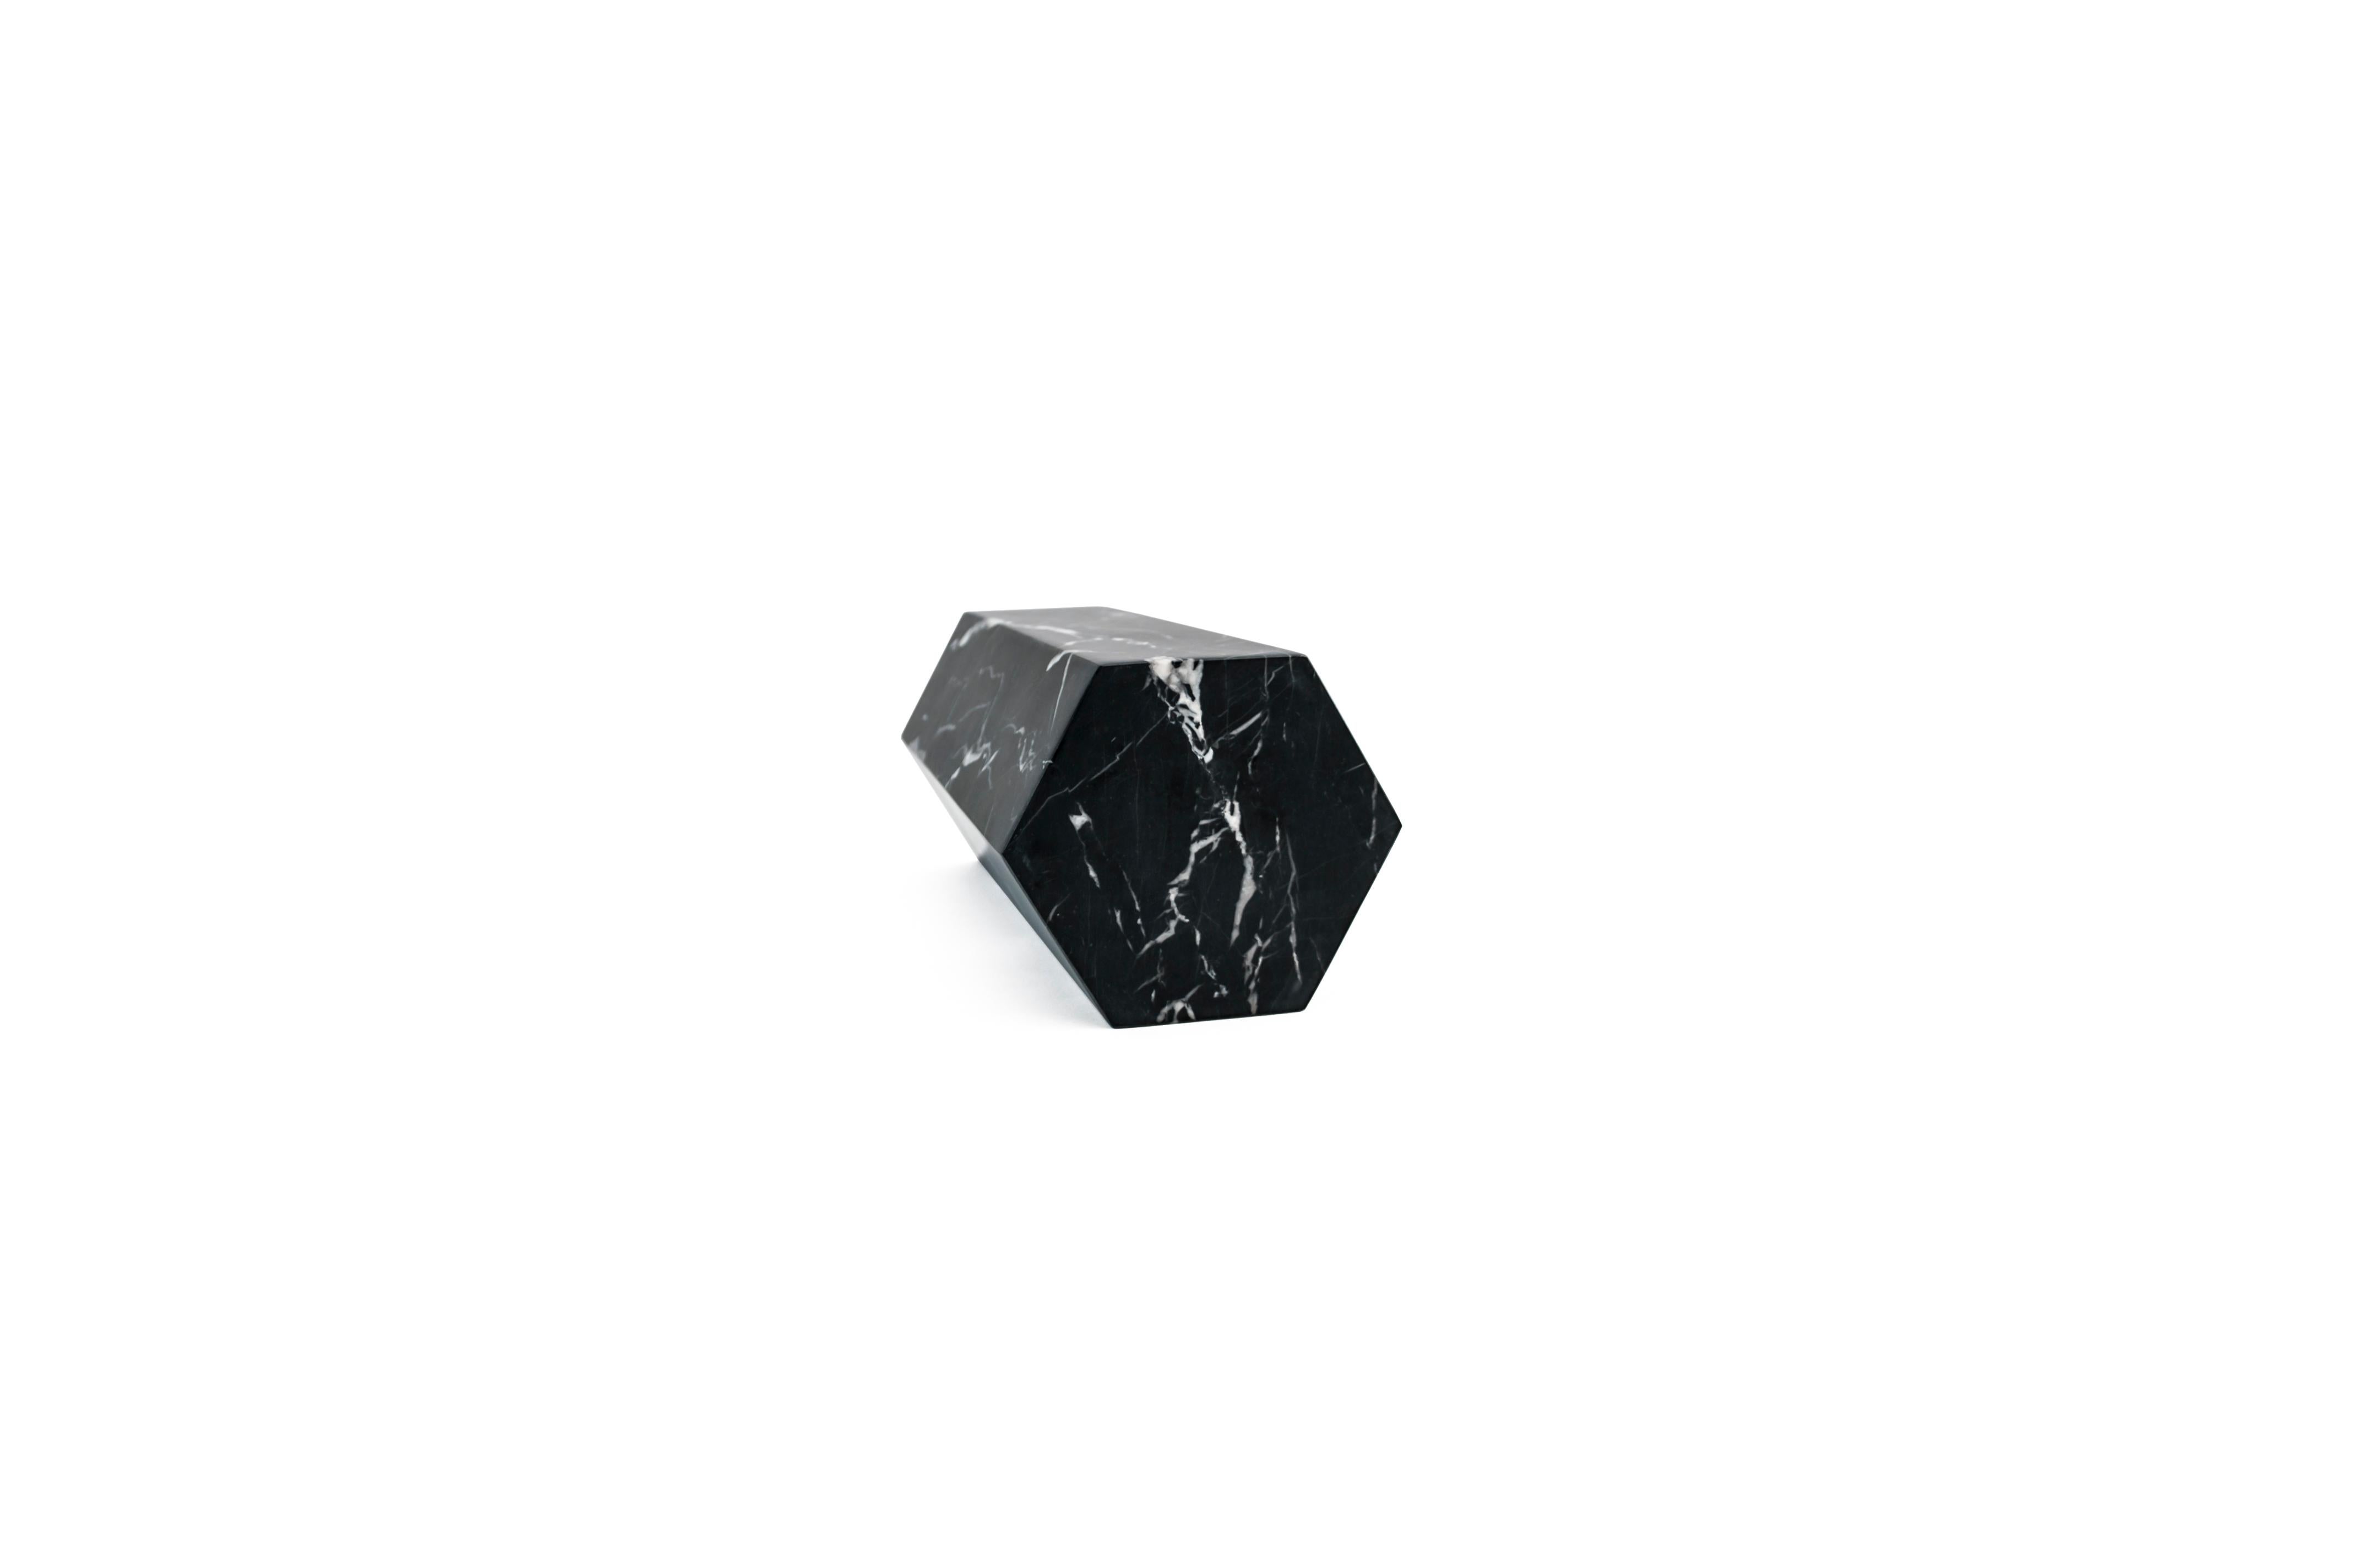 Hand-Crafted Handmade Big Decorative Prism / Bookend in Satin Black Marquina Marble For Sale